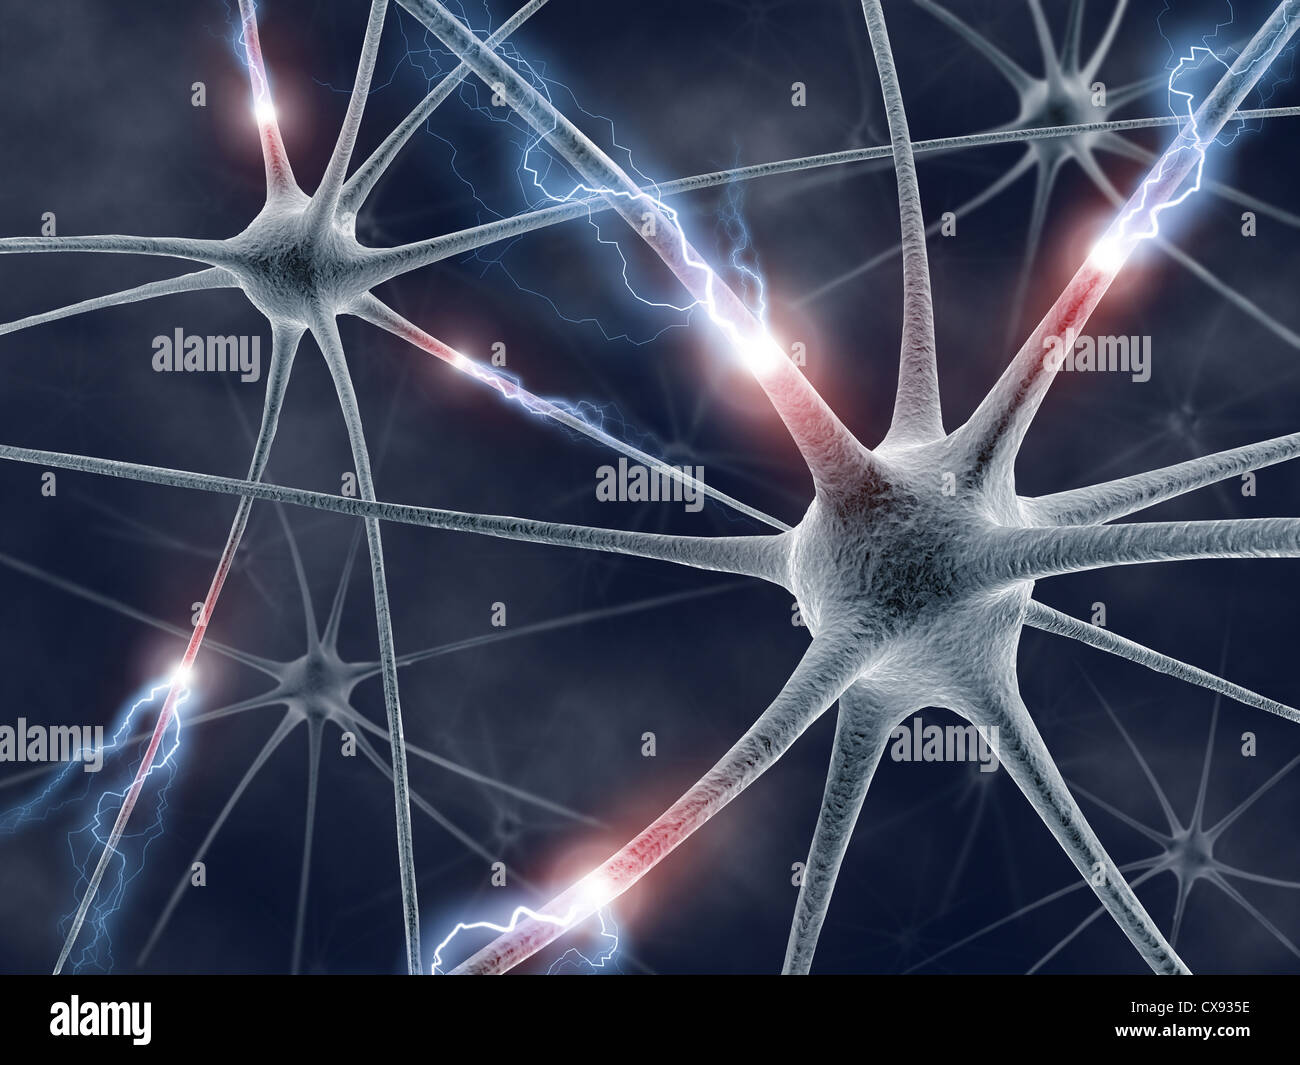 Image concept of neuron generating electrical pulses. Stock Photo